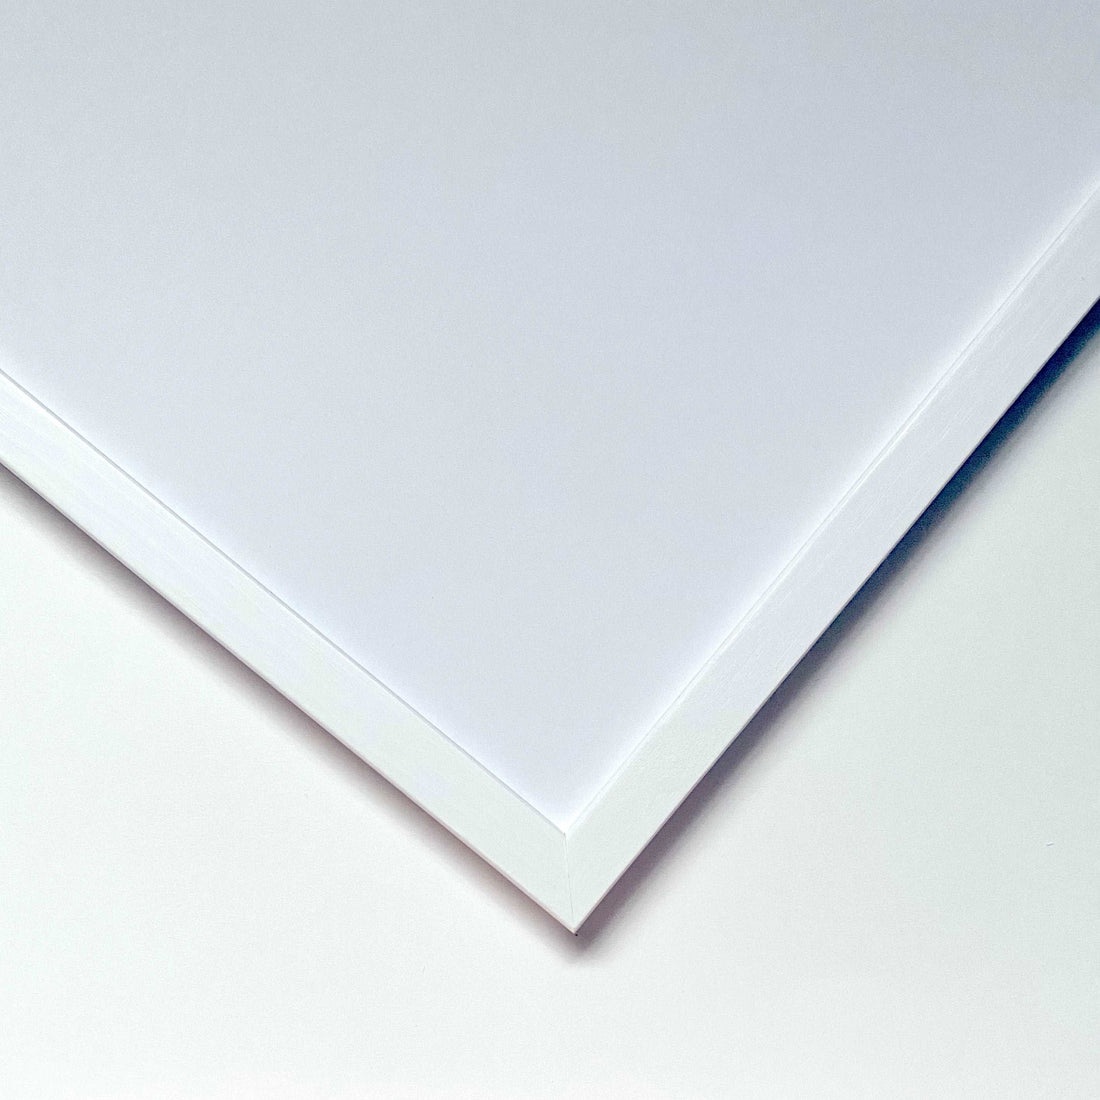 Frame A4 White - Add sophistication to your posters